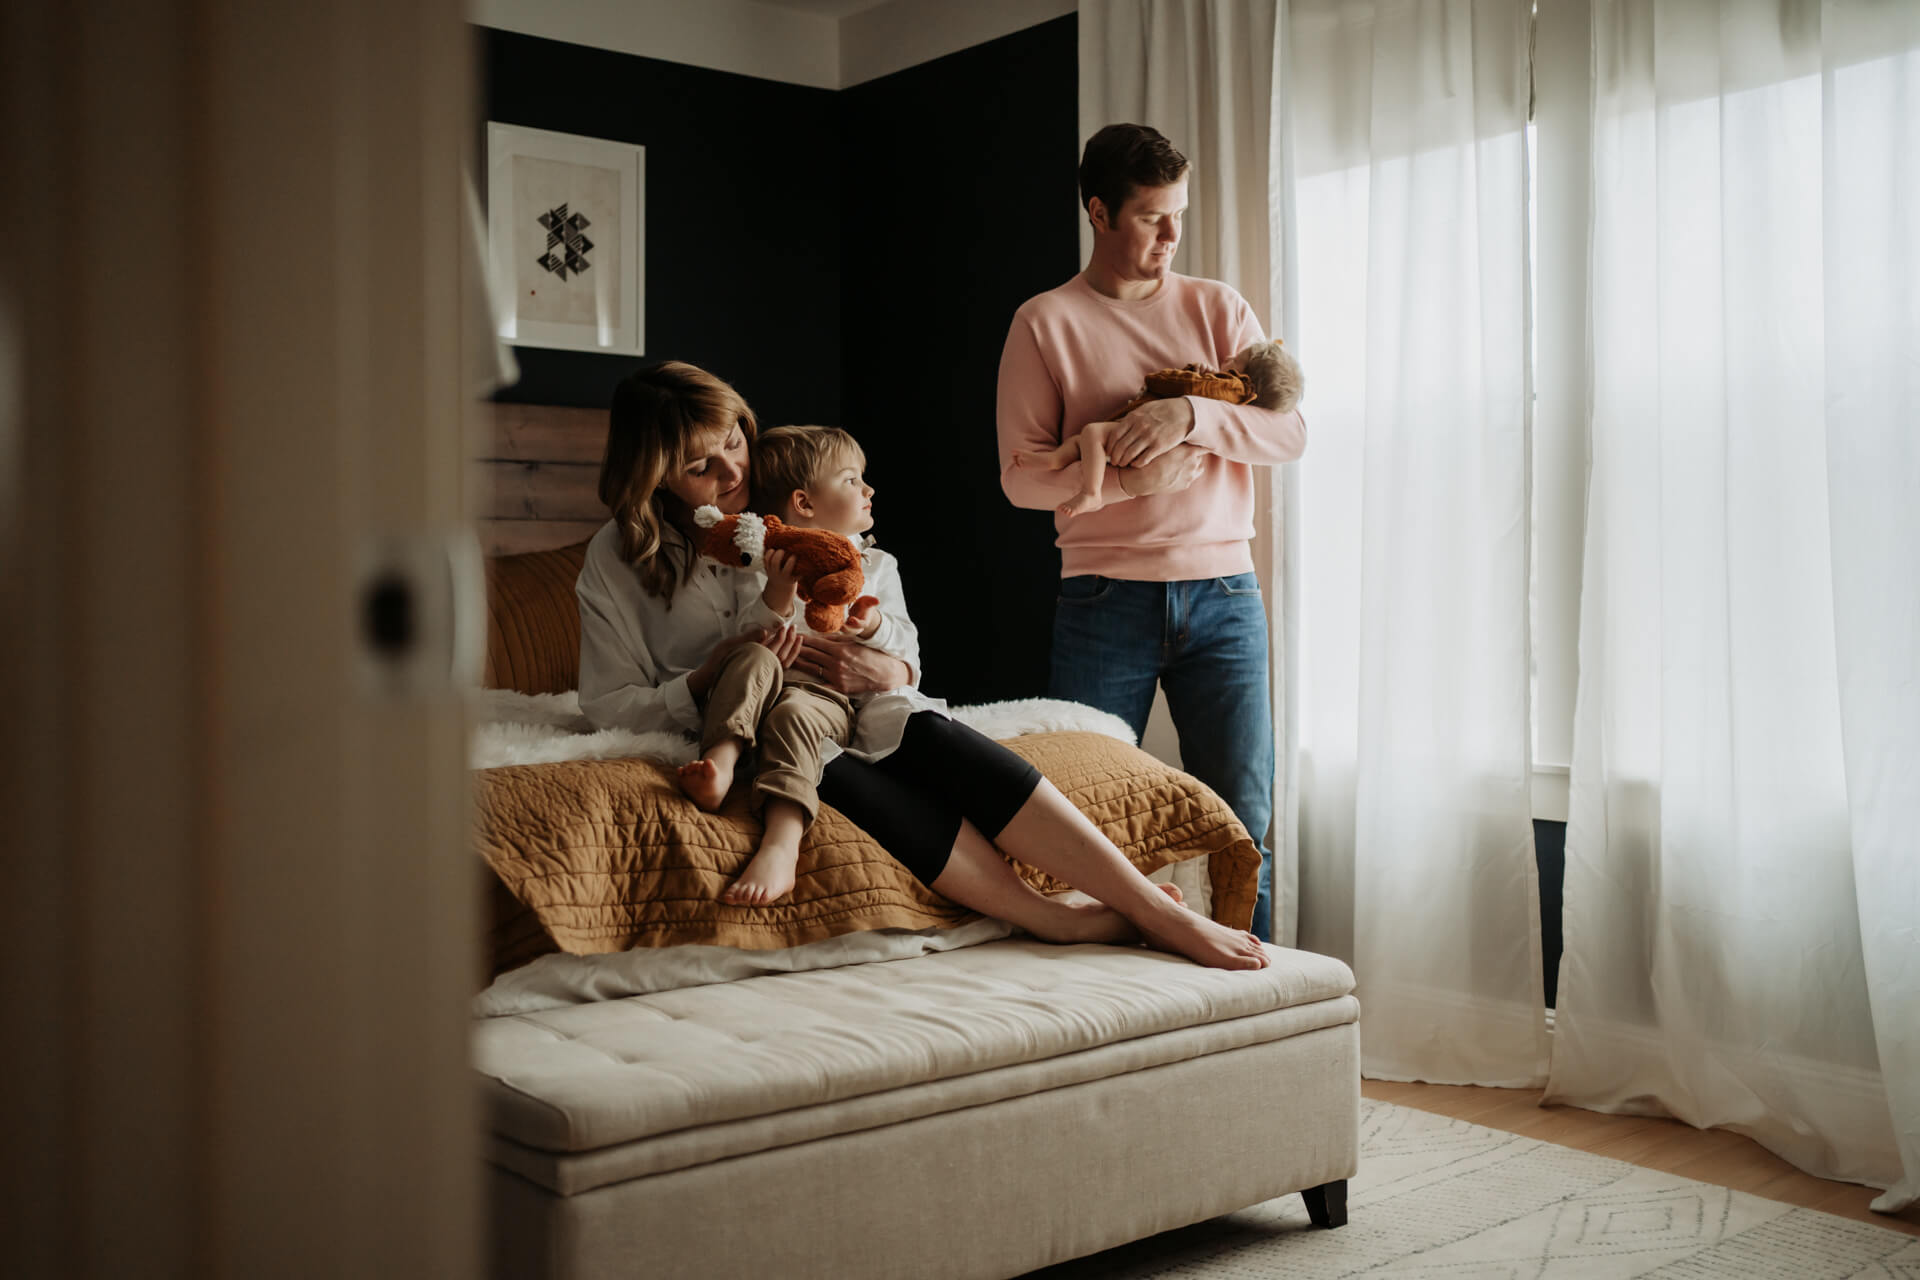 Mom and toddler sitting on a bed while dad is holding his newborn baby girls by the window